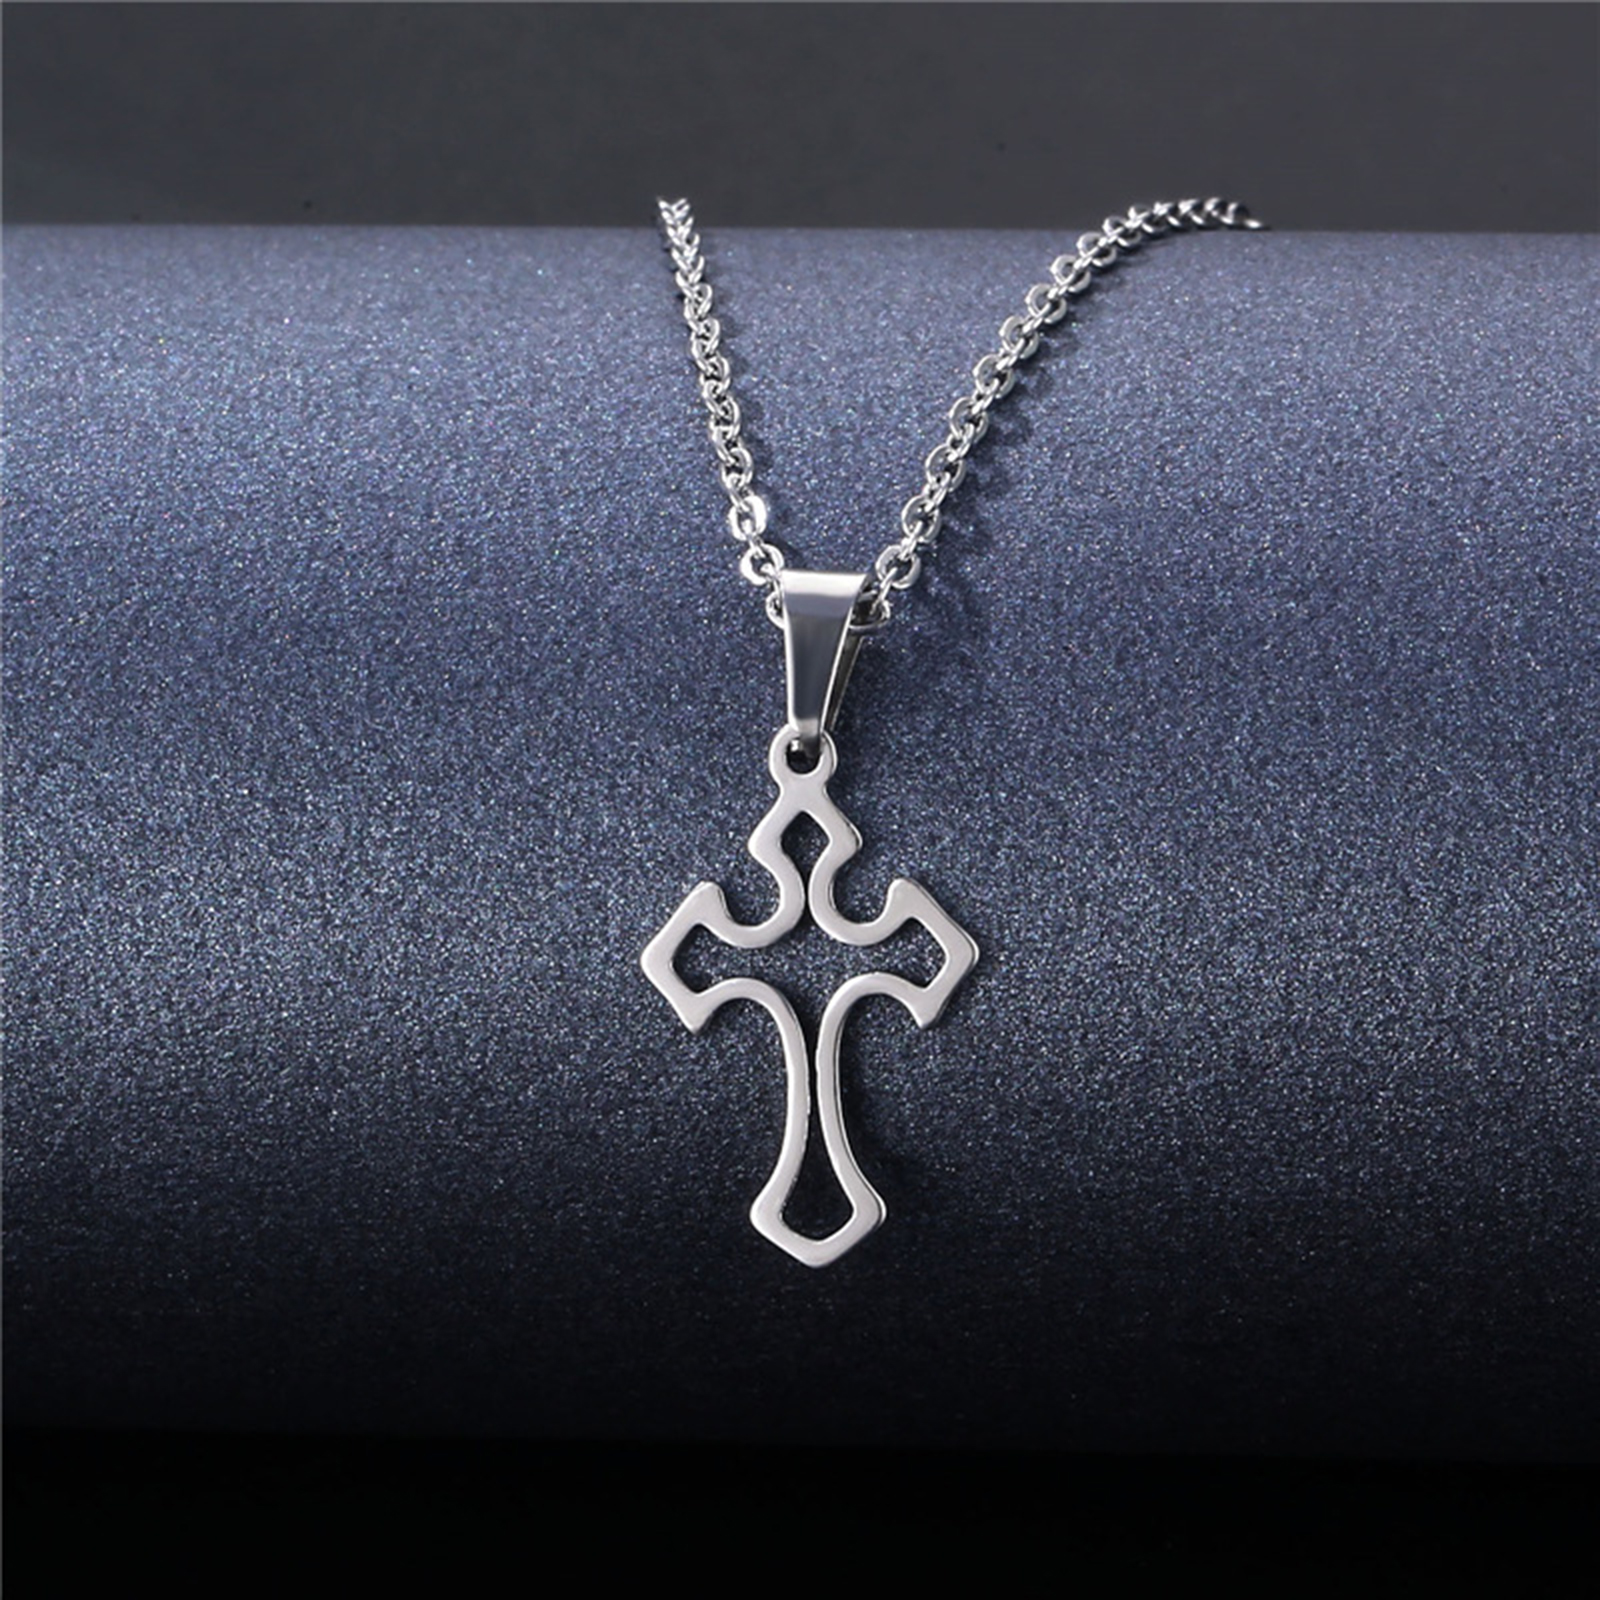 Picture of 304 Stainless Steel Religious Link Cable Chain Findings Necklace Silver Tone Cross 45cm(17 6/8") long, 1 Piece